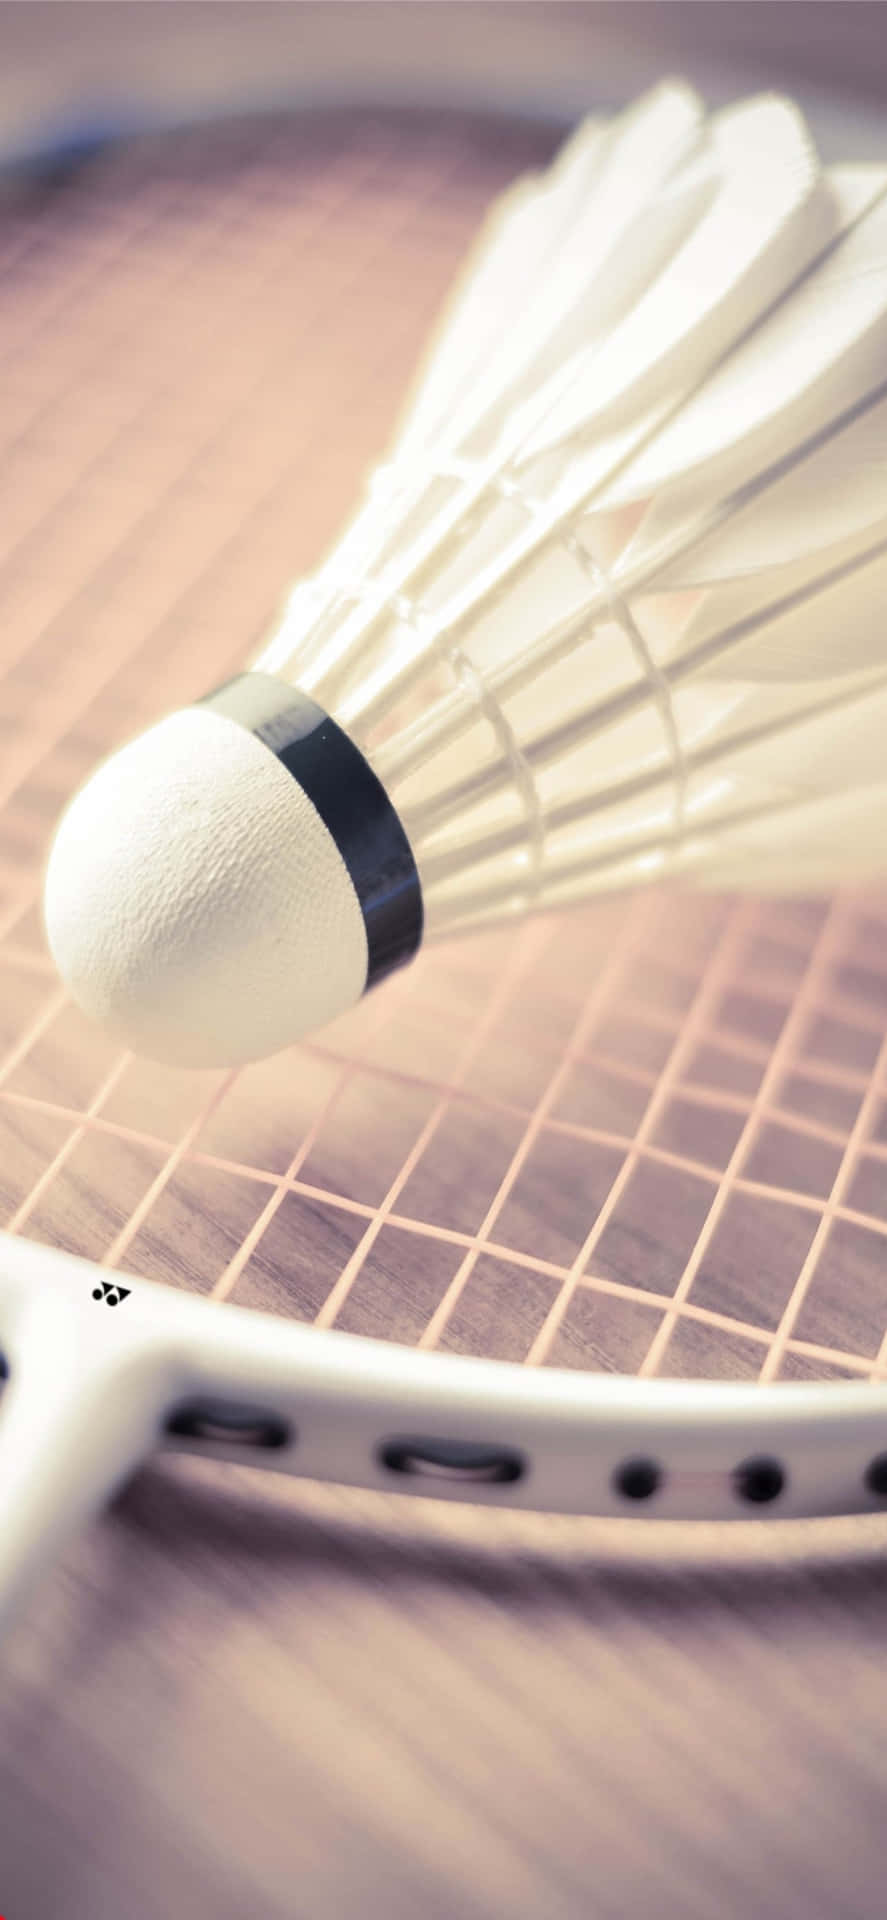 Image  Enjoying the Game of Badminton on Your iPhone XS Max